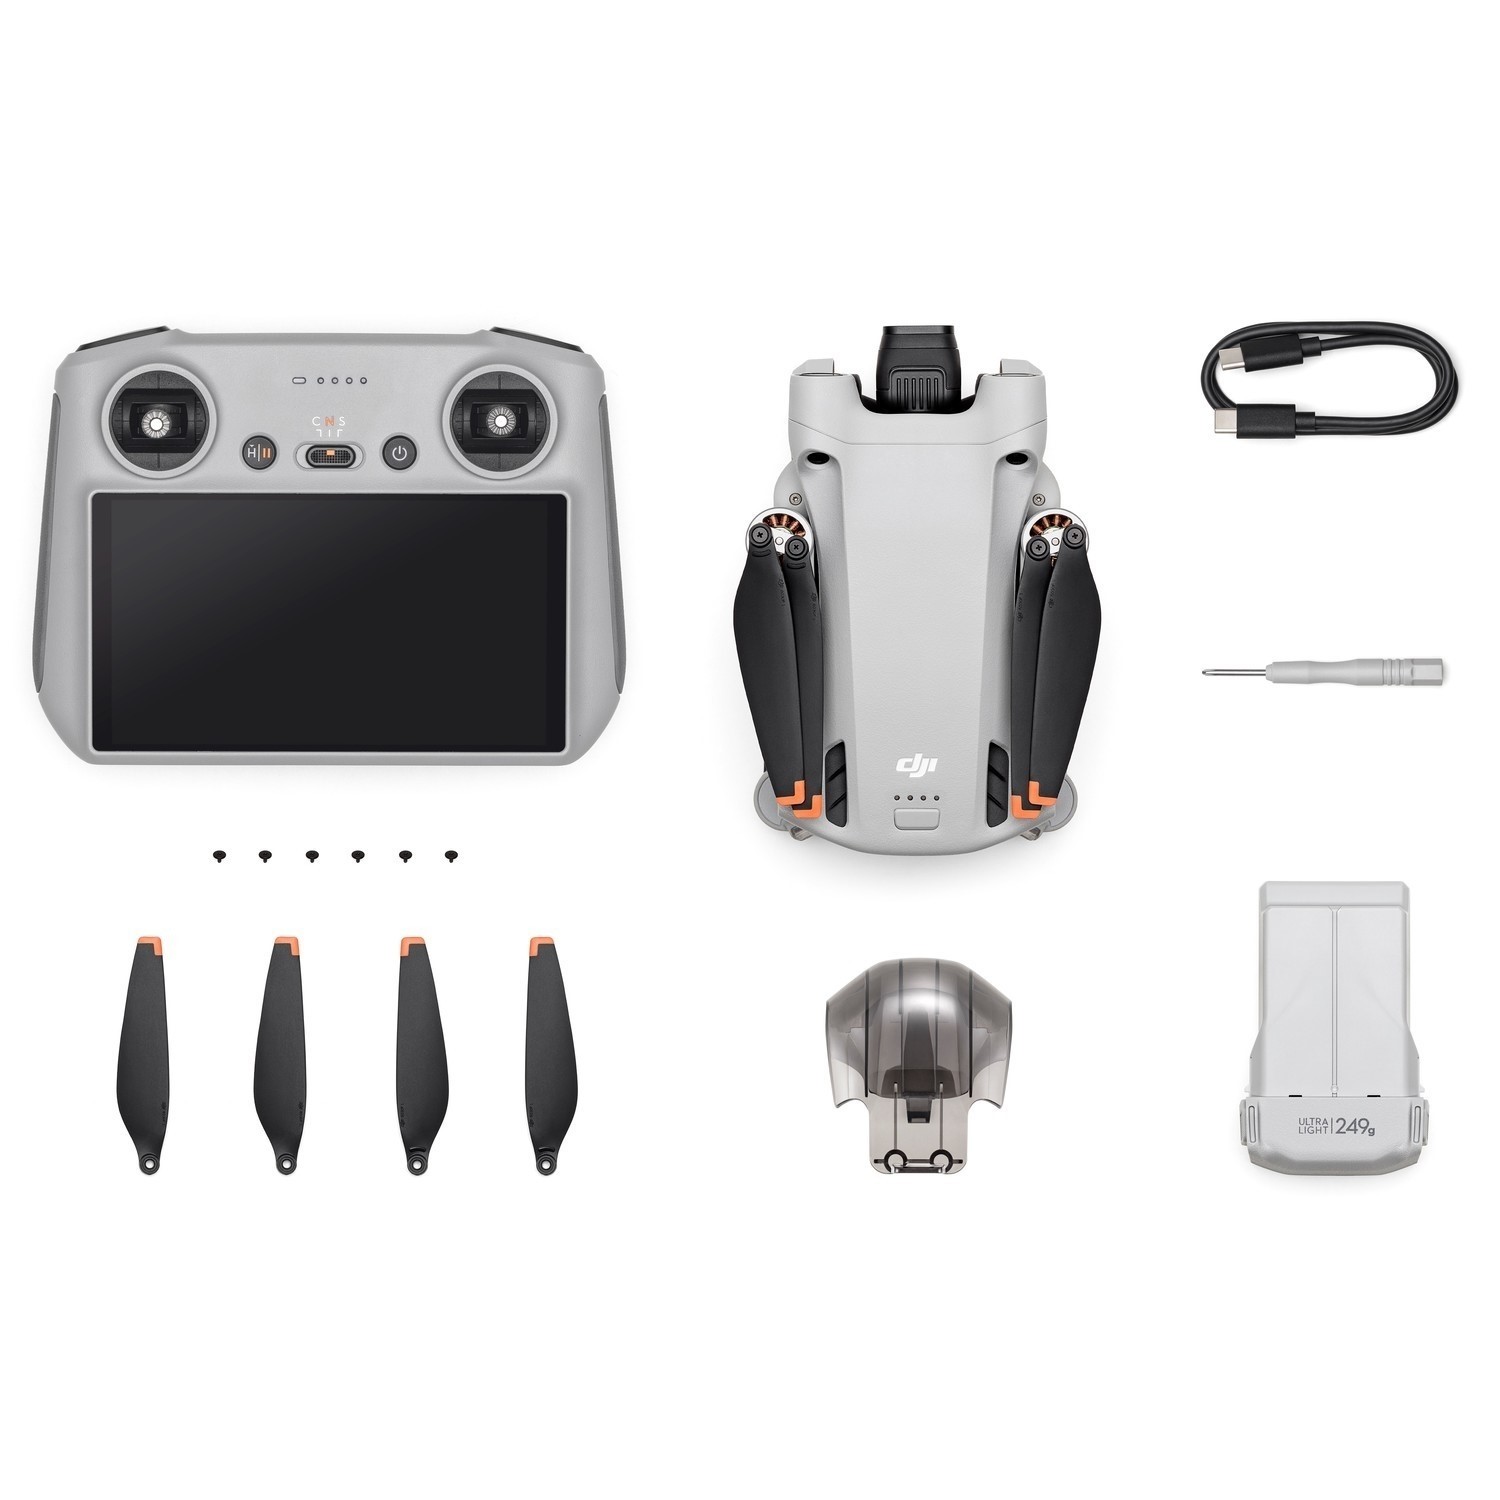 DJI Air 3 Drone Fly More Combo with RC 2 Remote Controller - Grey